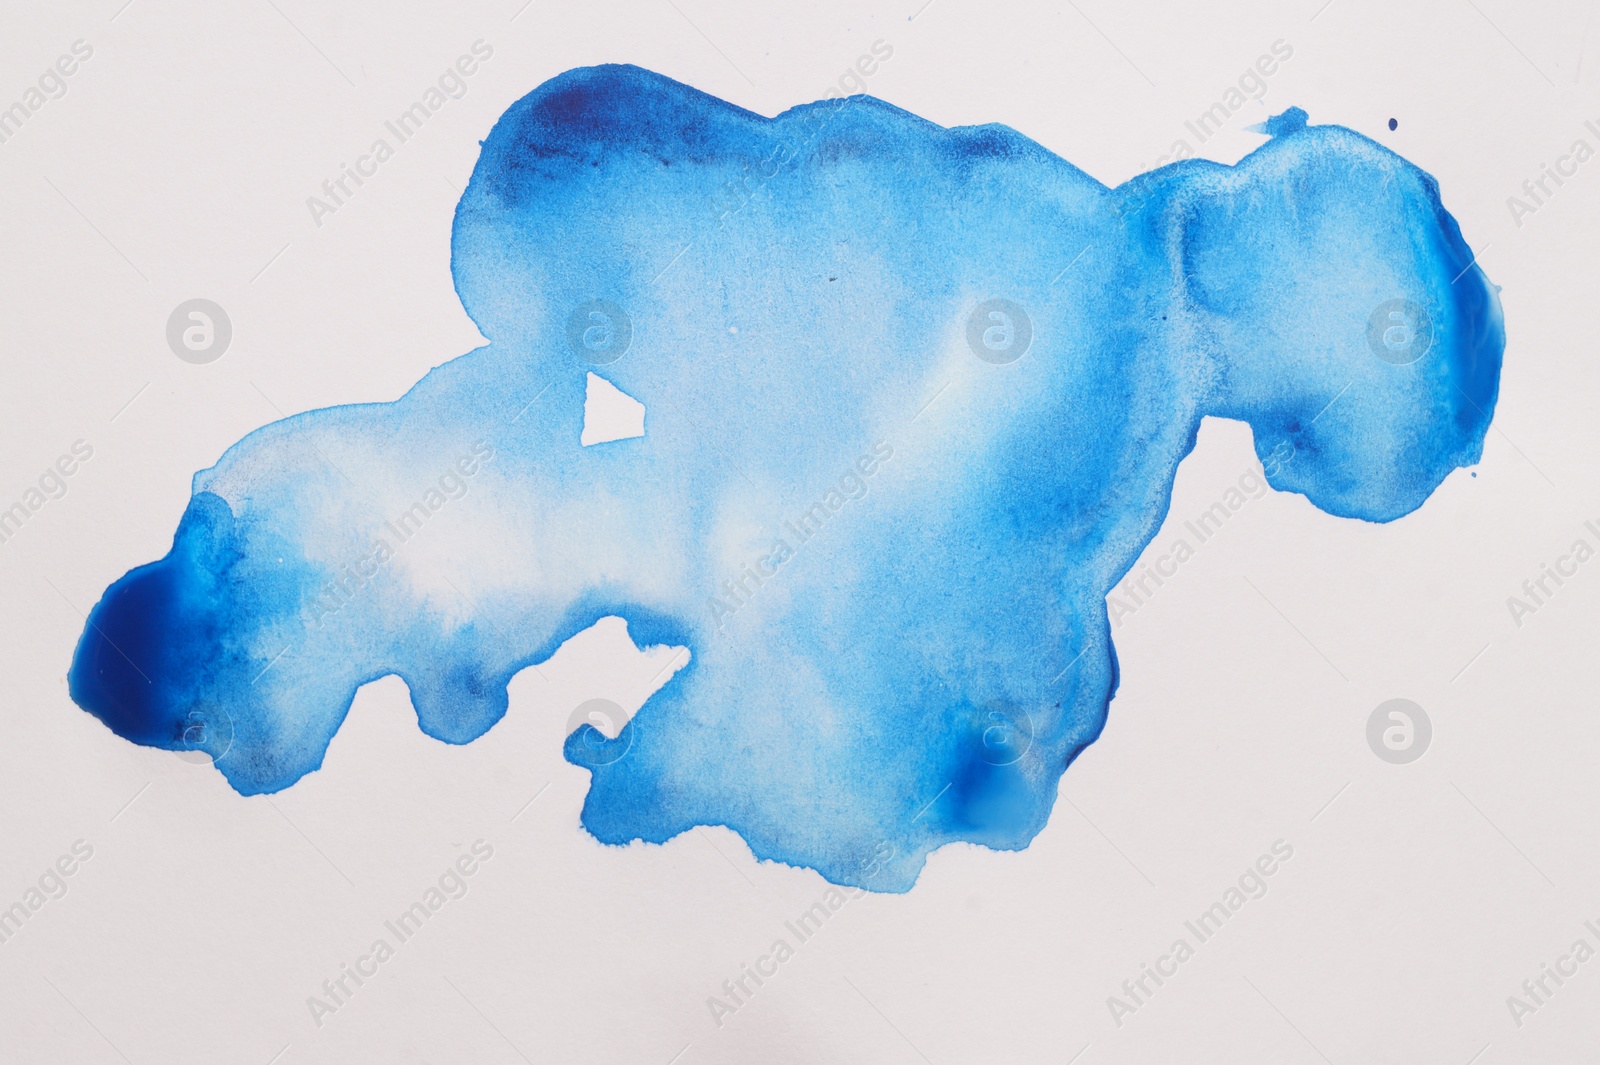 Photo of Blot of light blue watercolor paint on white paper, top view